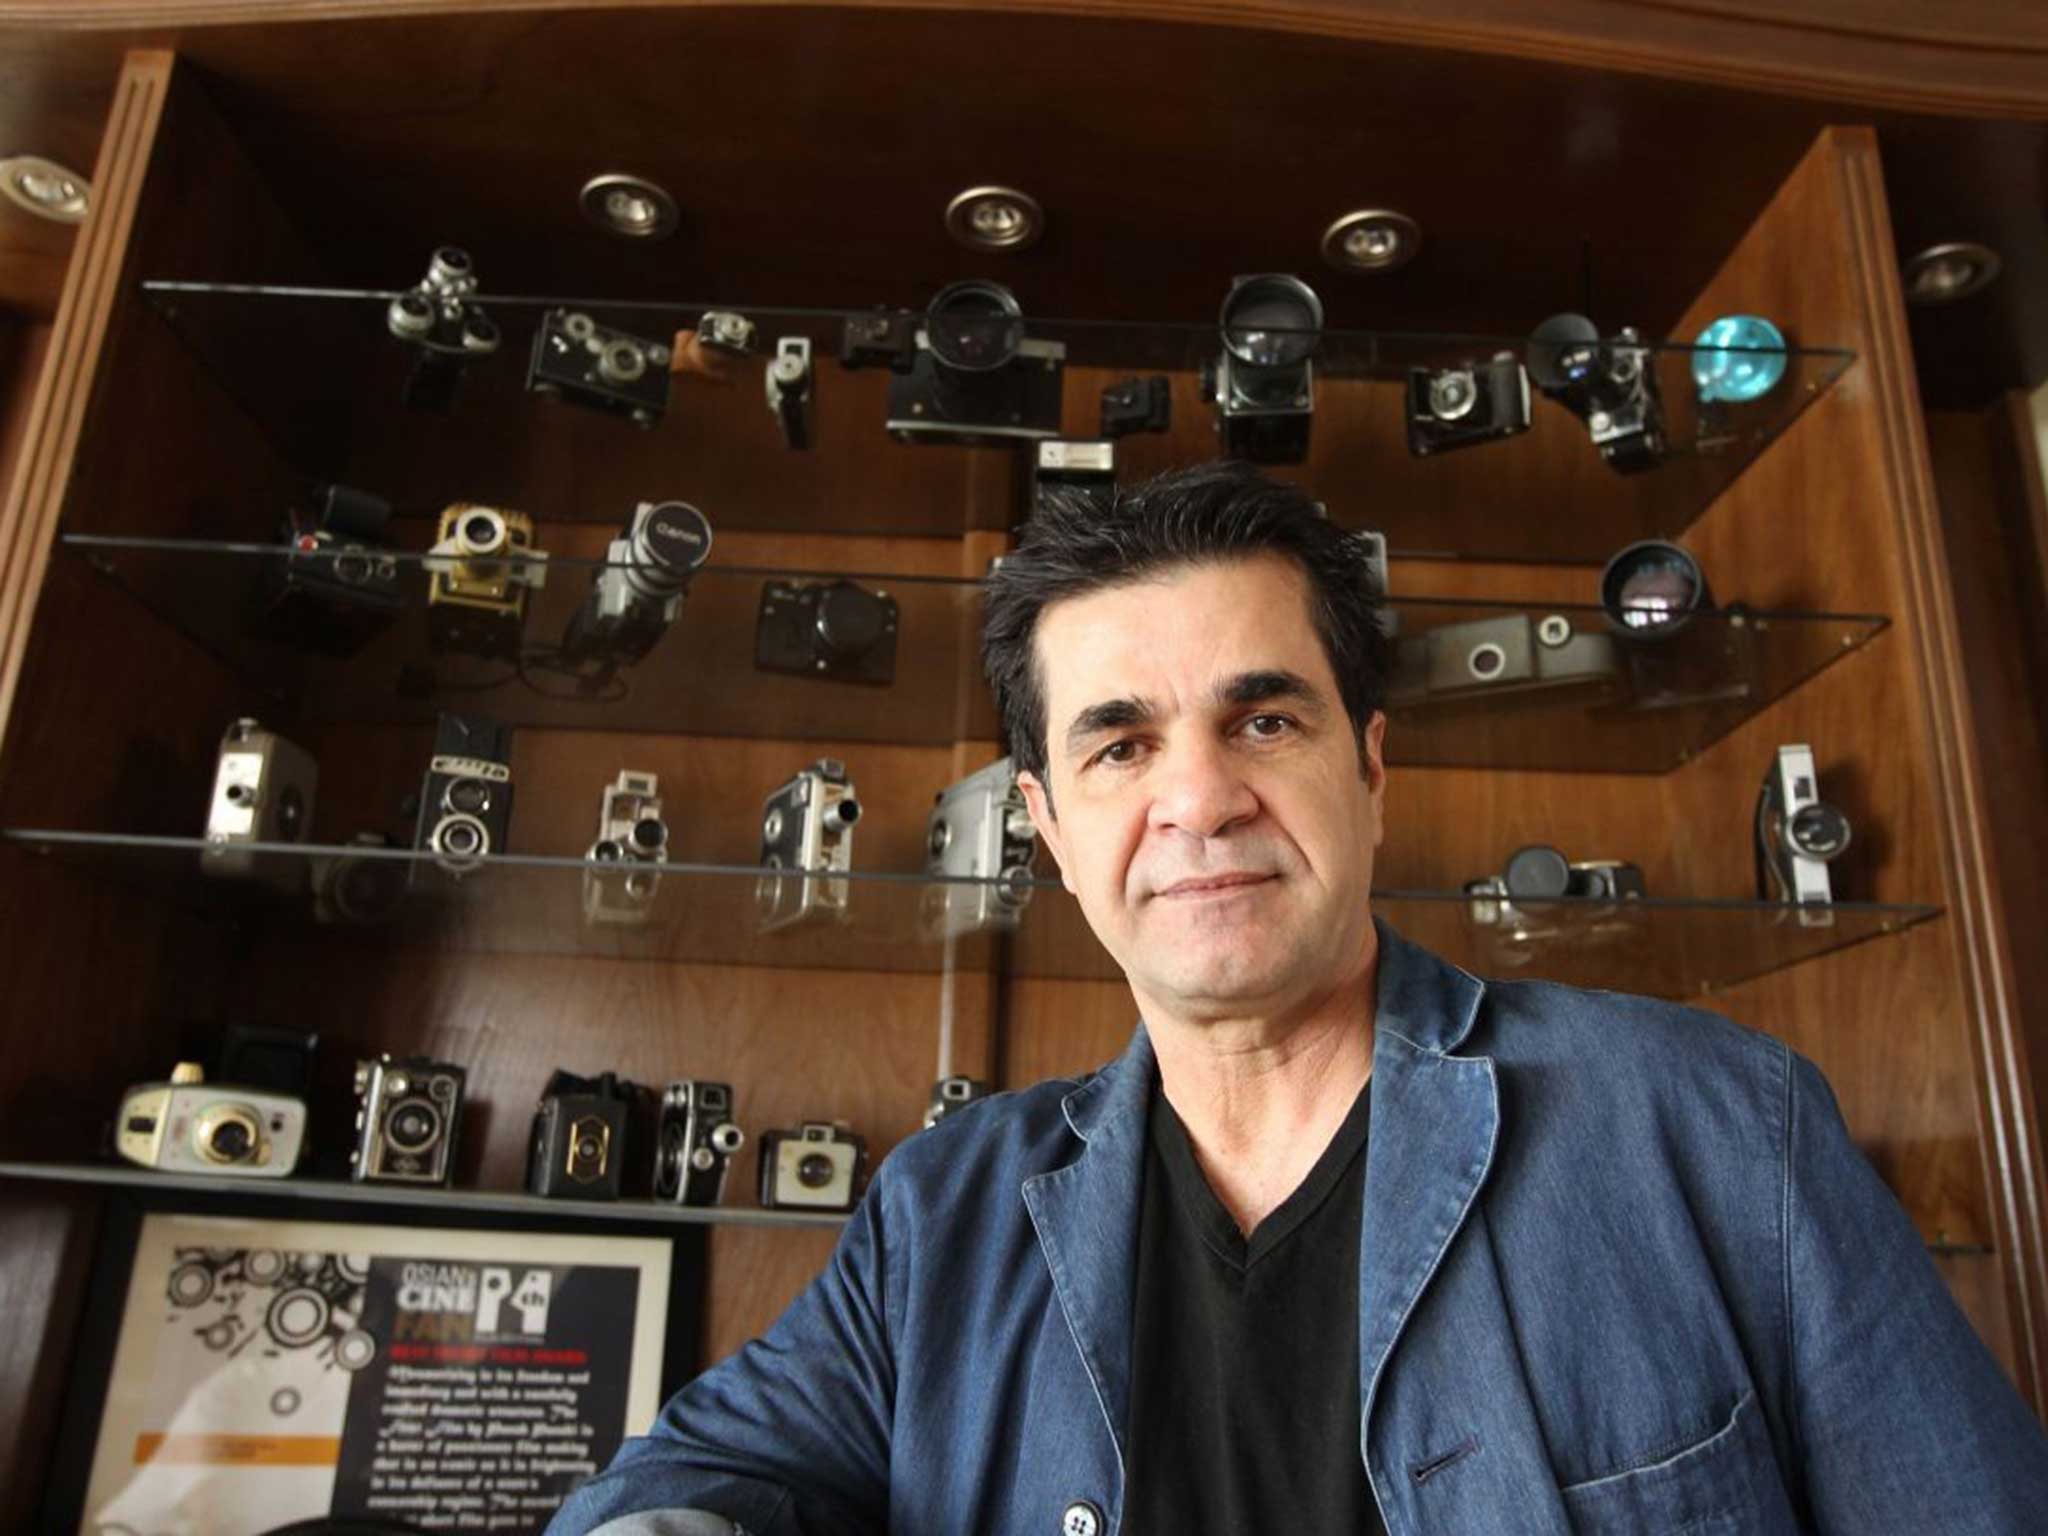 Iranian director Jafar Panahi’s new film, ‘Taxi’, champions the cause of Ghoncheh Ghavami, jailed for watching a men’s volleyball game